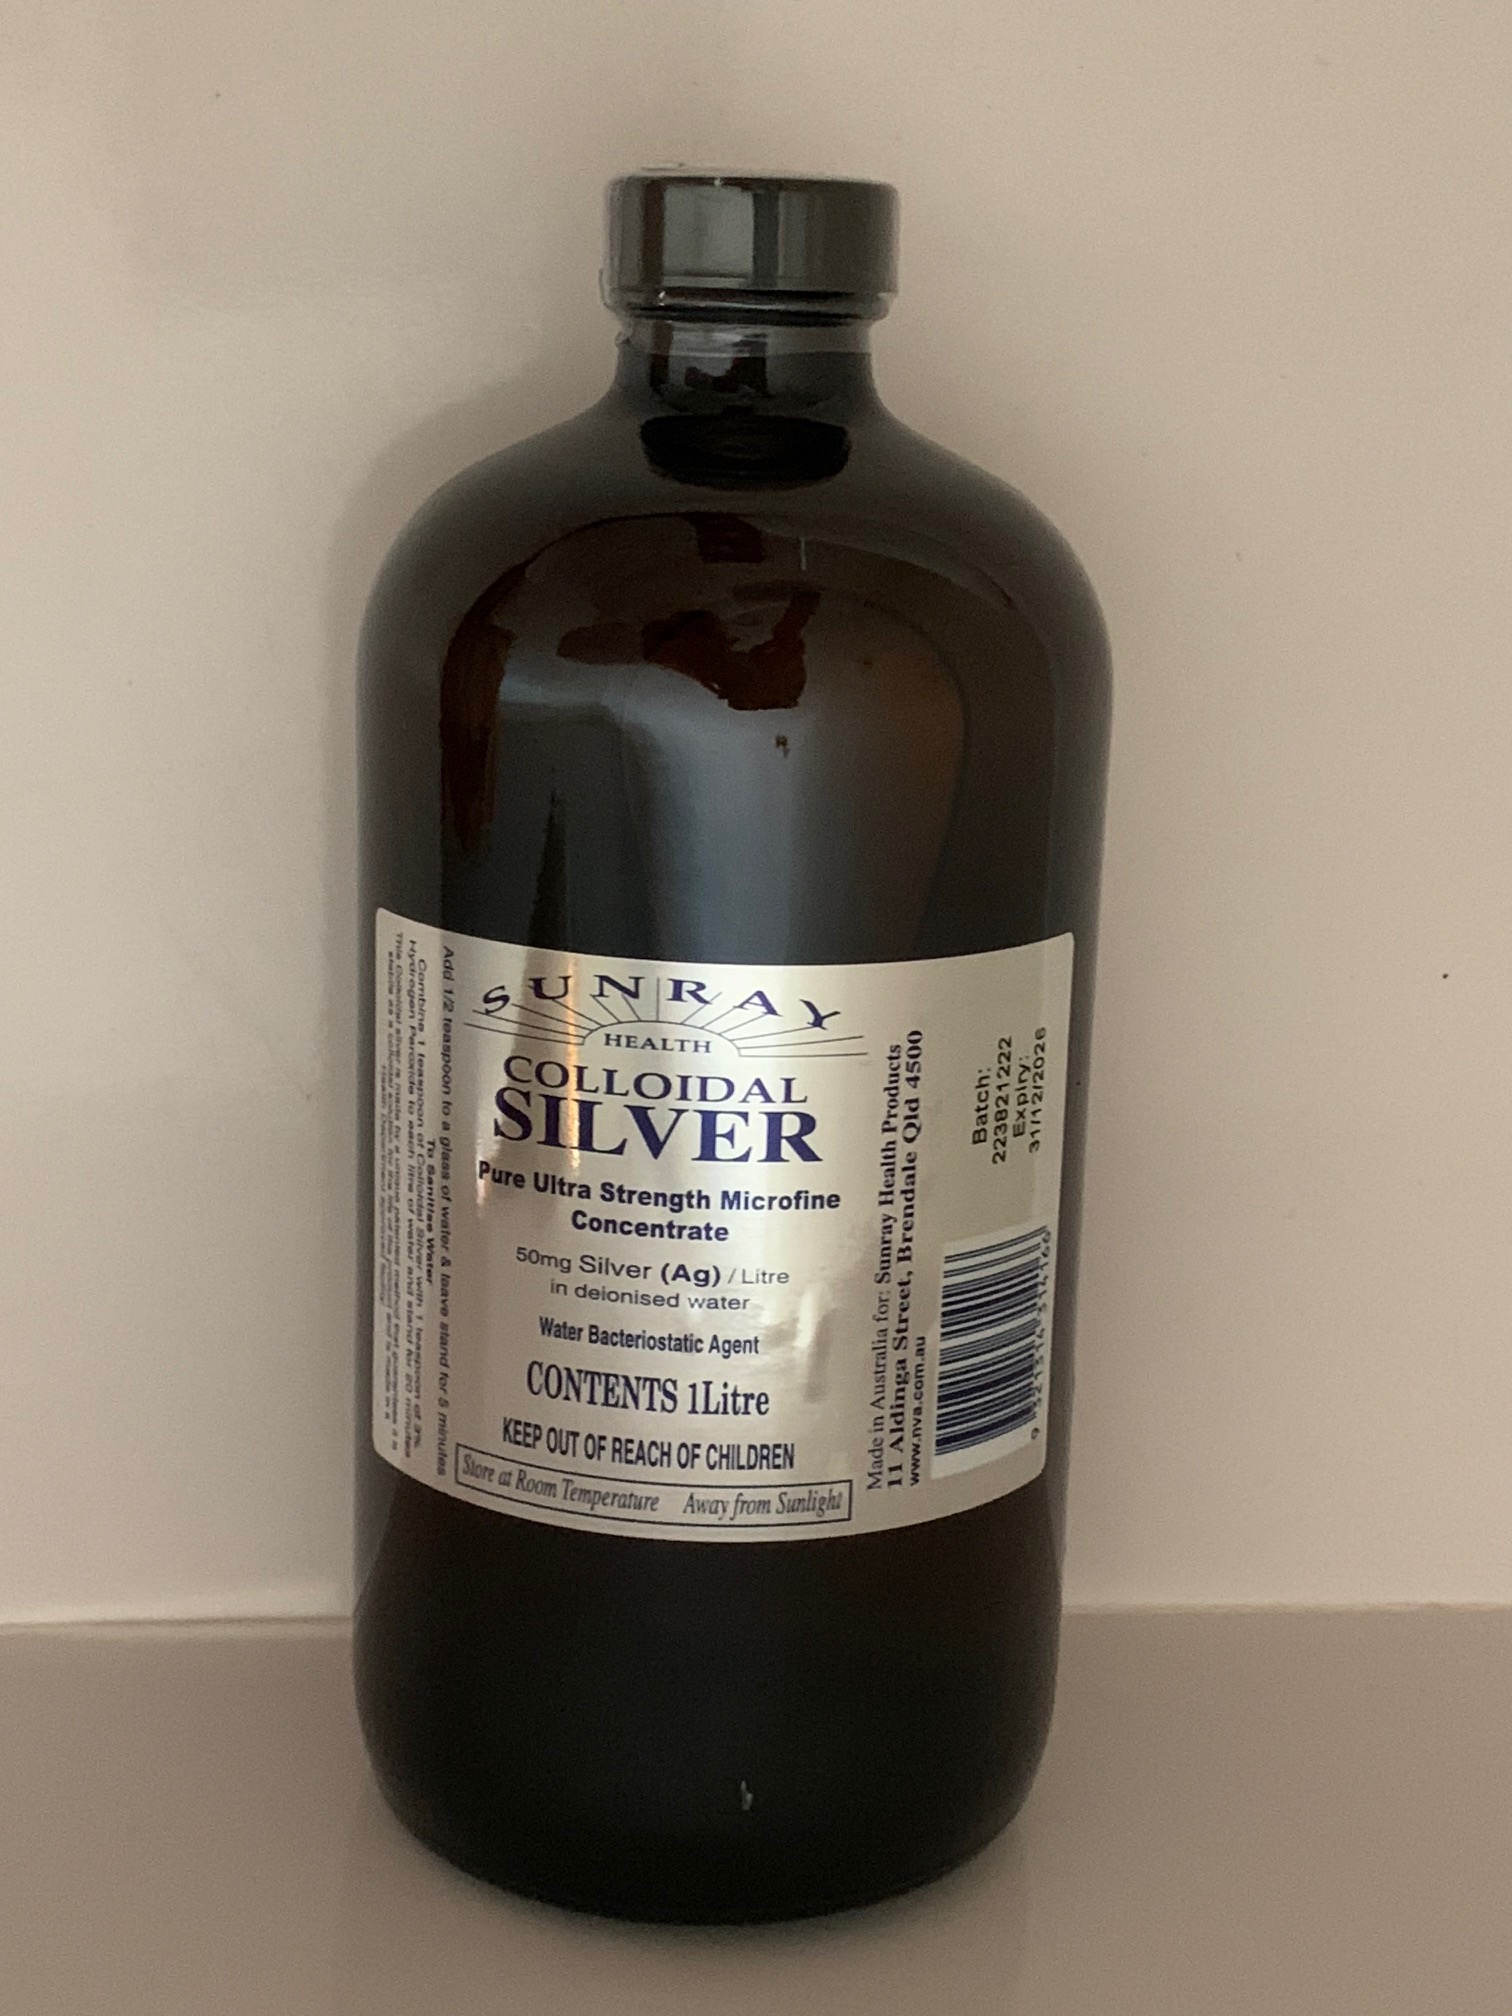 Pure Microfine Colloidal Silver. 50ppmSilver (Ag)/Lt. In de-ionised water. 1-litre.